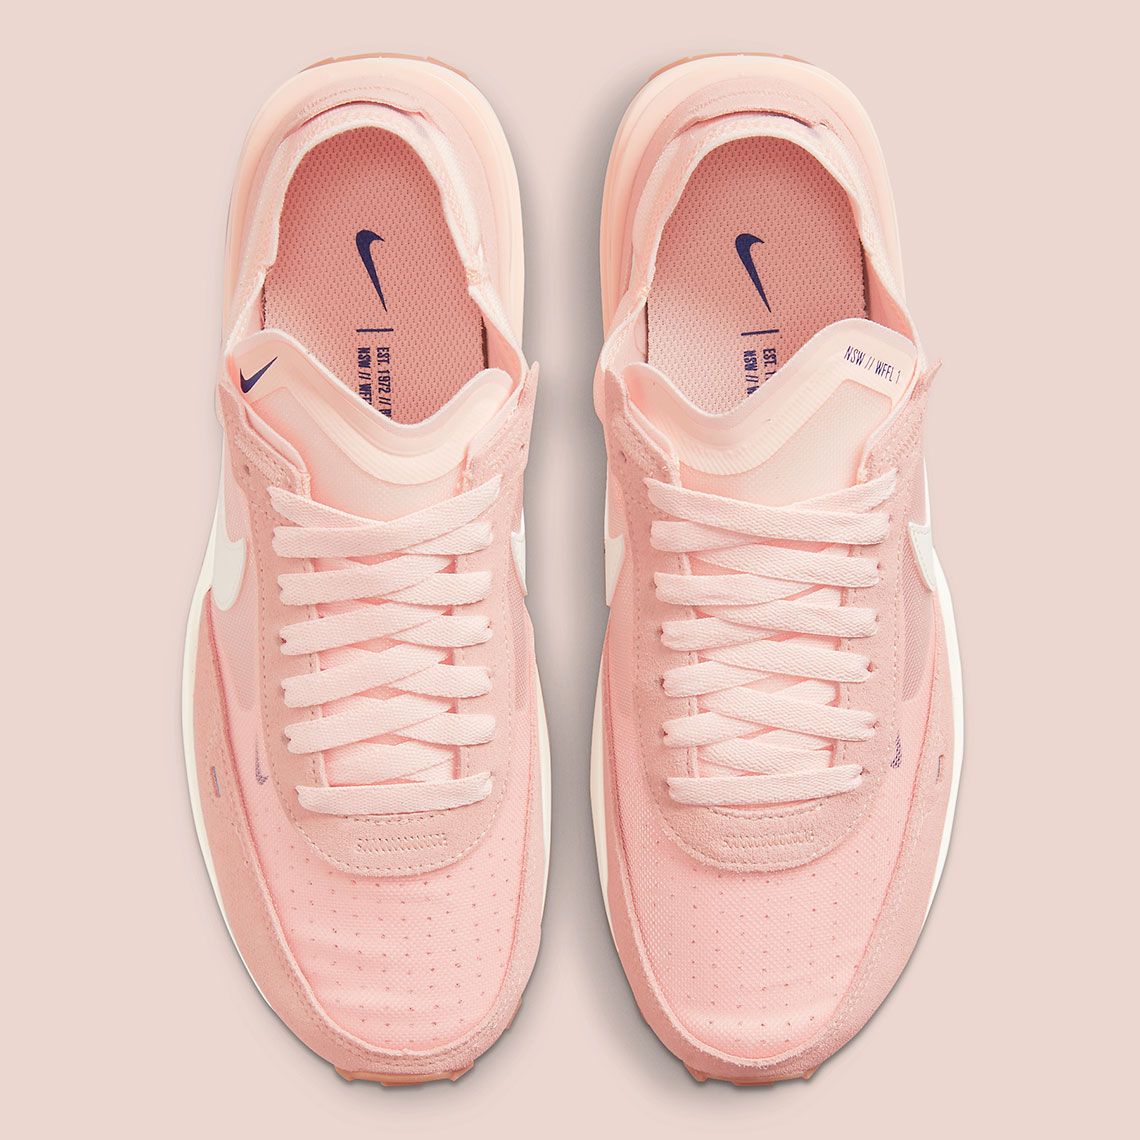 Nike Waffle One Pink Coral Waffle DC2533-801 | SneakerNews.com